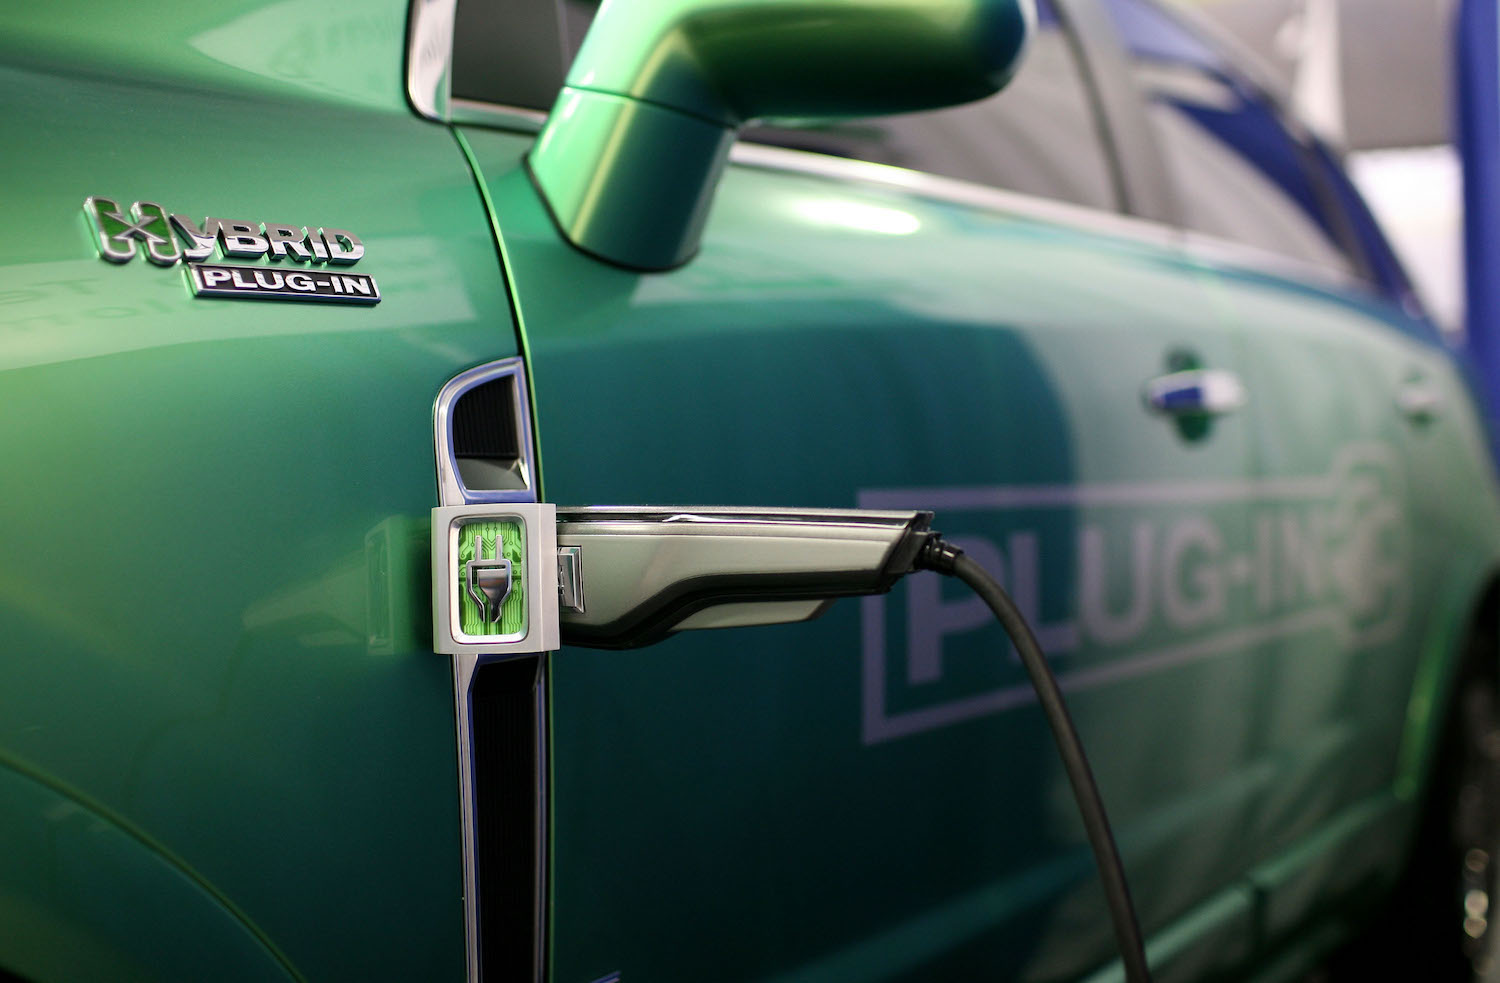 Close-up of a plug-in hybrid's charger in its green fender, PHEV badge visible in the foreground.